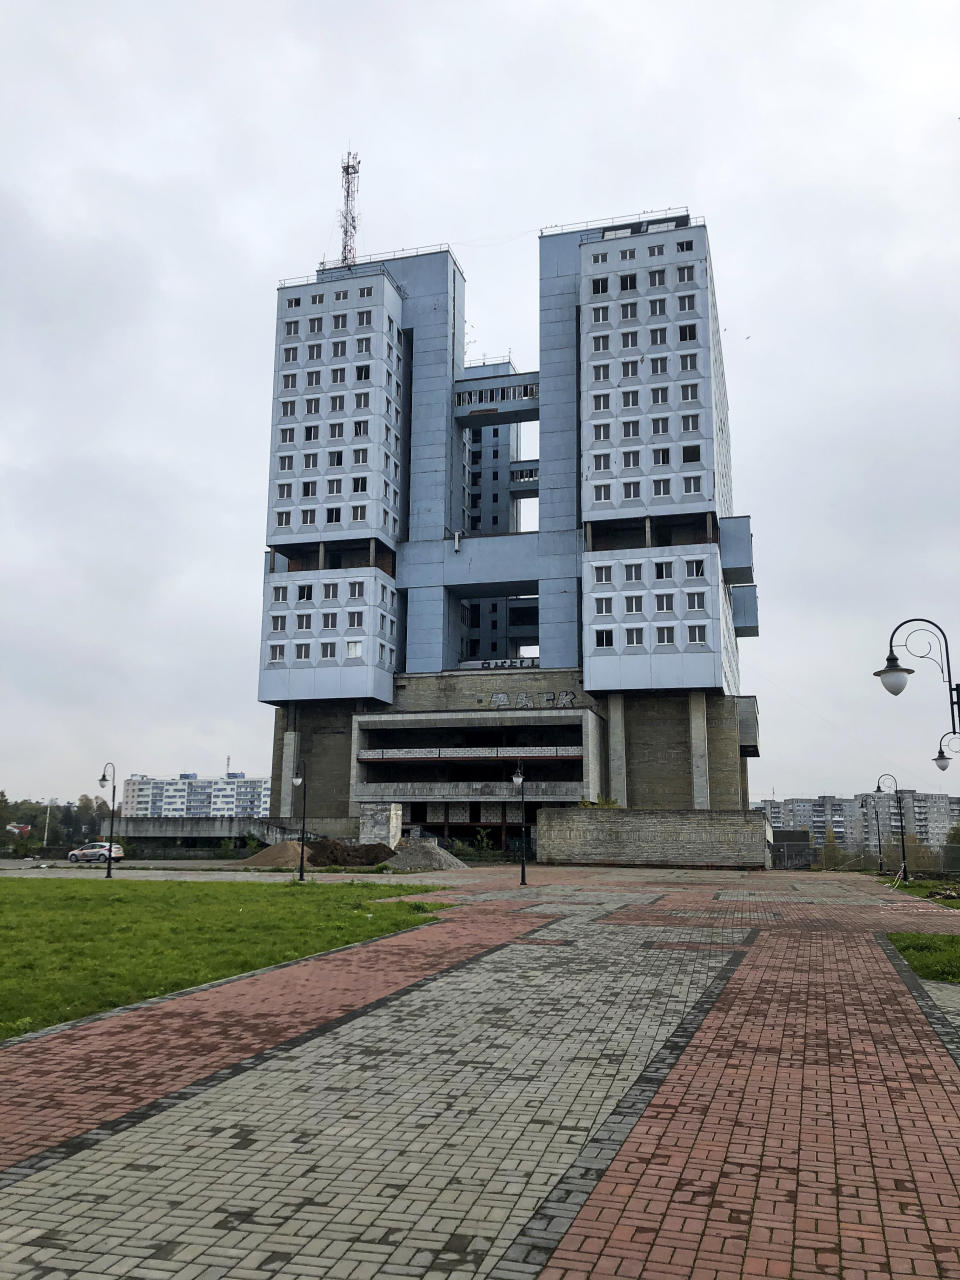 The never-occupied building is seen in Kaliningrad, Russia, Thursday, Oct. 29, 2020. The hulking never-occupied building sardonically likened to a robot's head that has loomed over the city of Kaliningrad for decades is to be demolished next year, the region's governor says. The 21-story House of Soviets was left unfinished when funding ran out in 1985 amid the Soviet Union's economic struggles and later was assessed to be structurally unsound. (AP Photo/James Heintz)